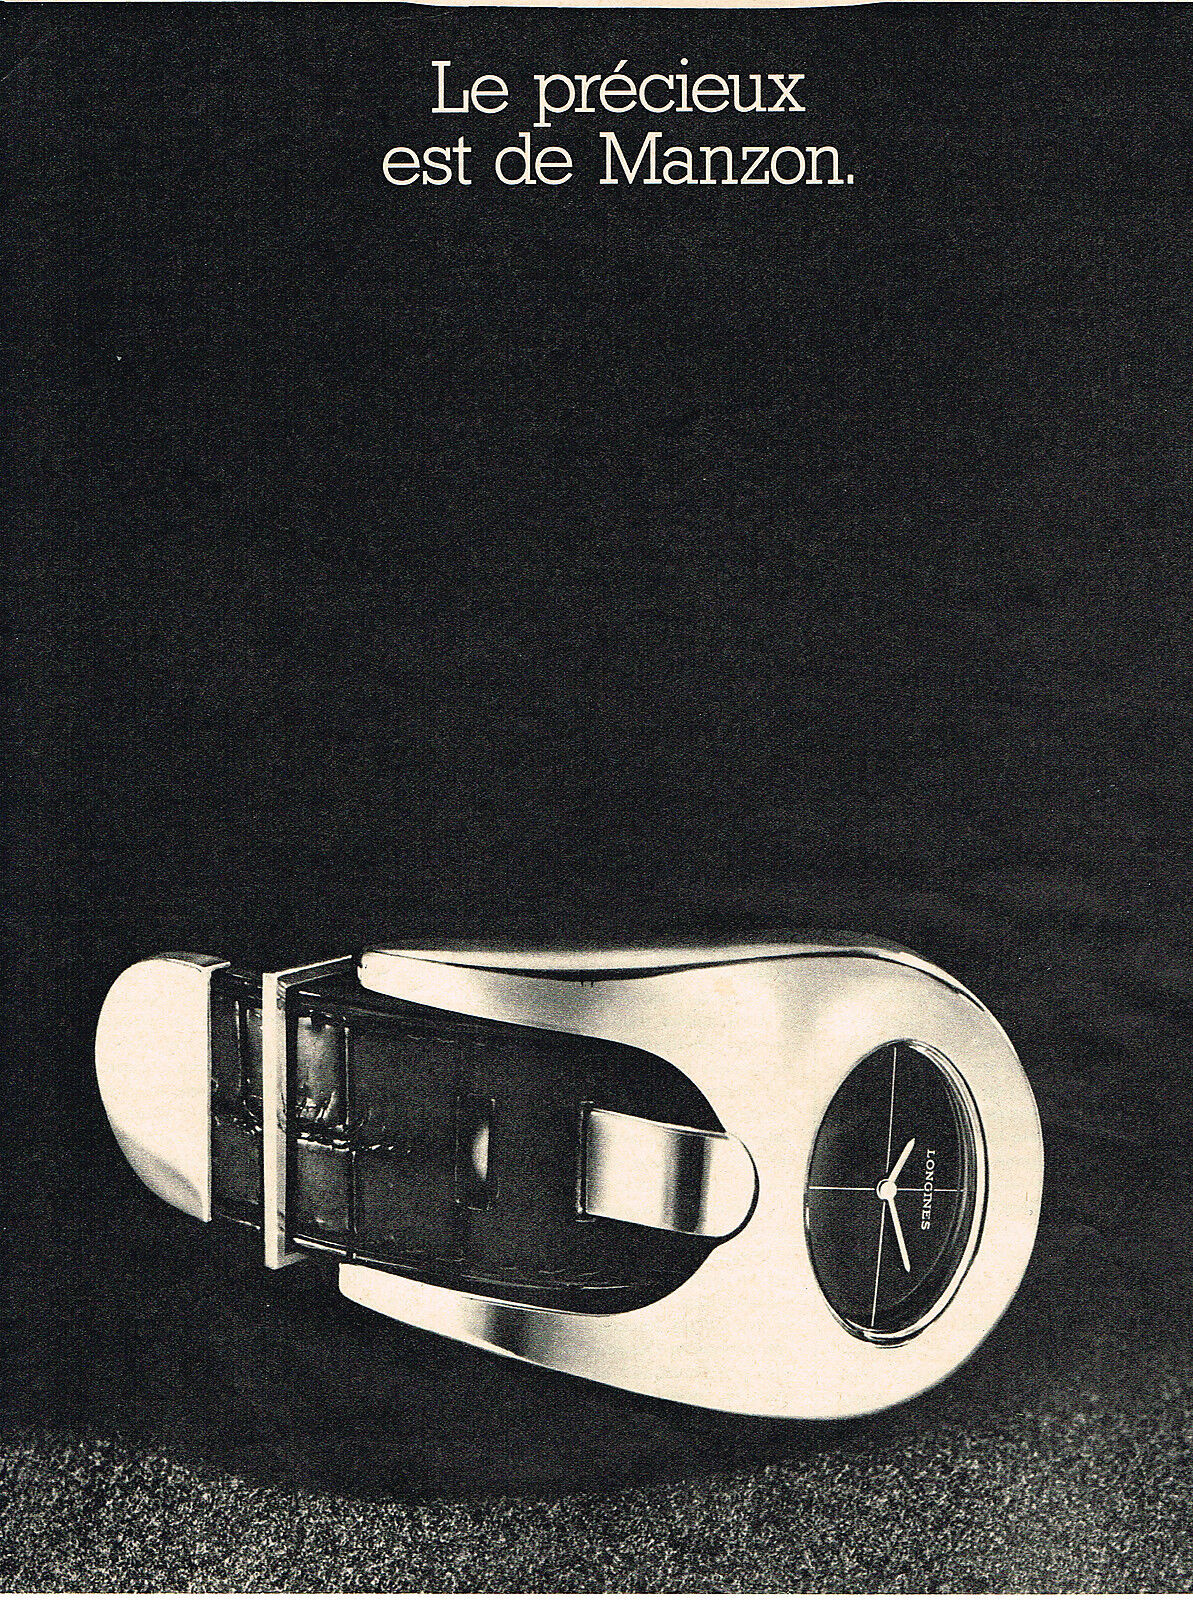 1973 ADVERTISING ADVERTISEMENT 064 LONGINES MANZON Watch Collection